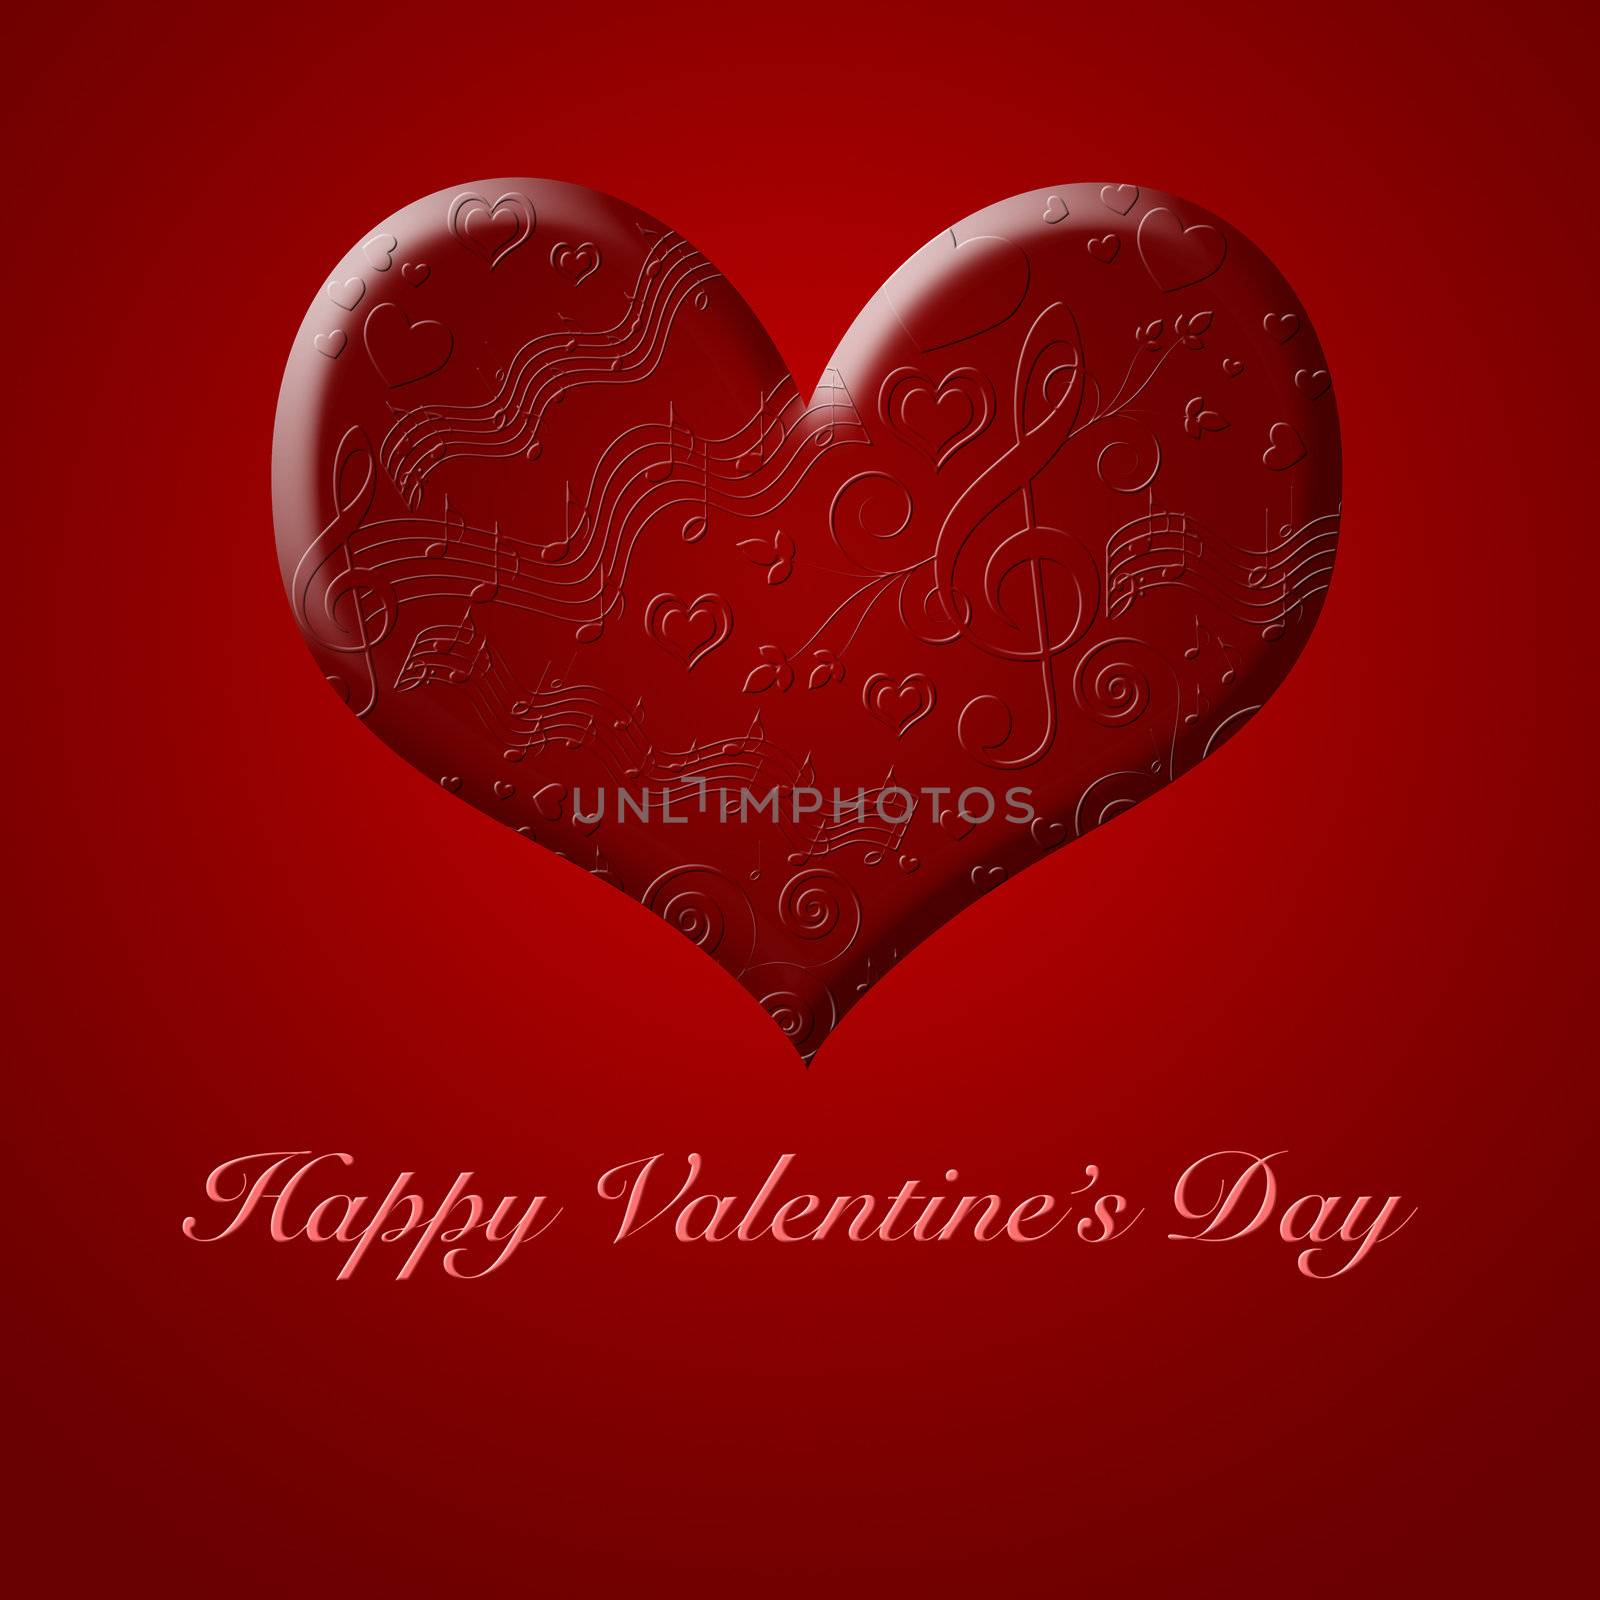 Happy Valentines Day Music Songs from the Red Heart by Davidgn